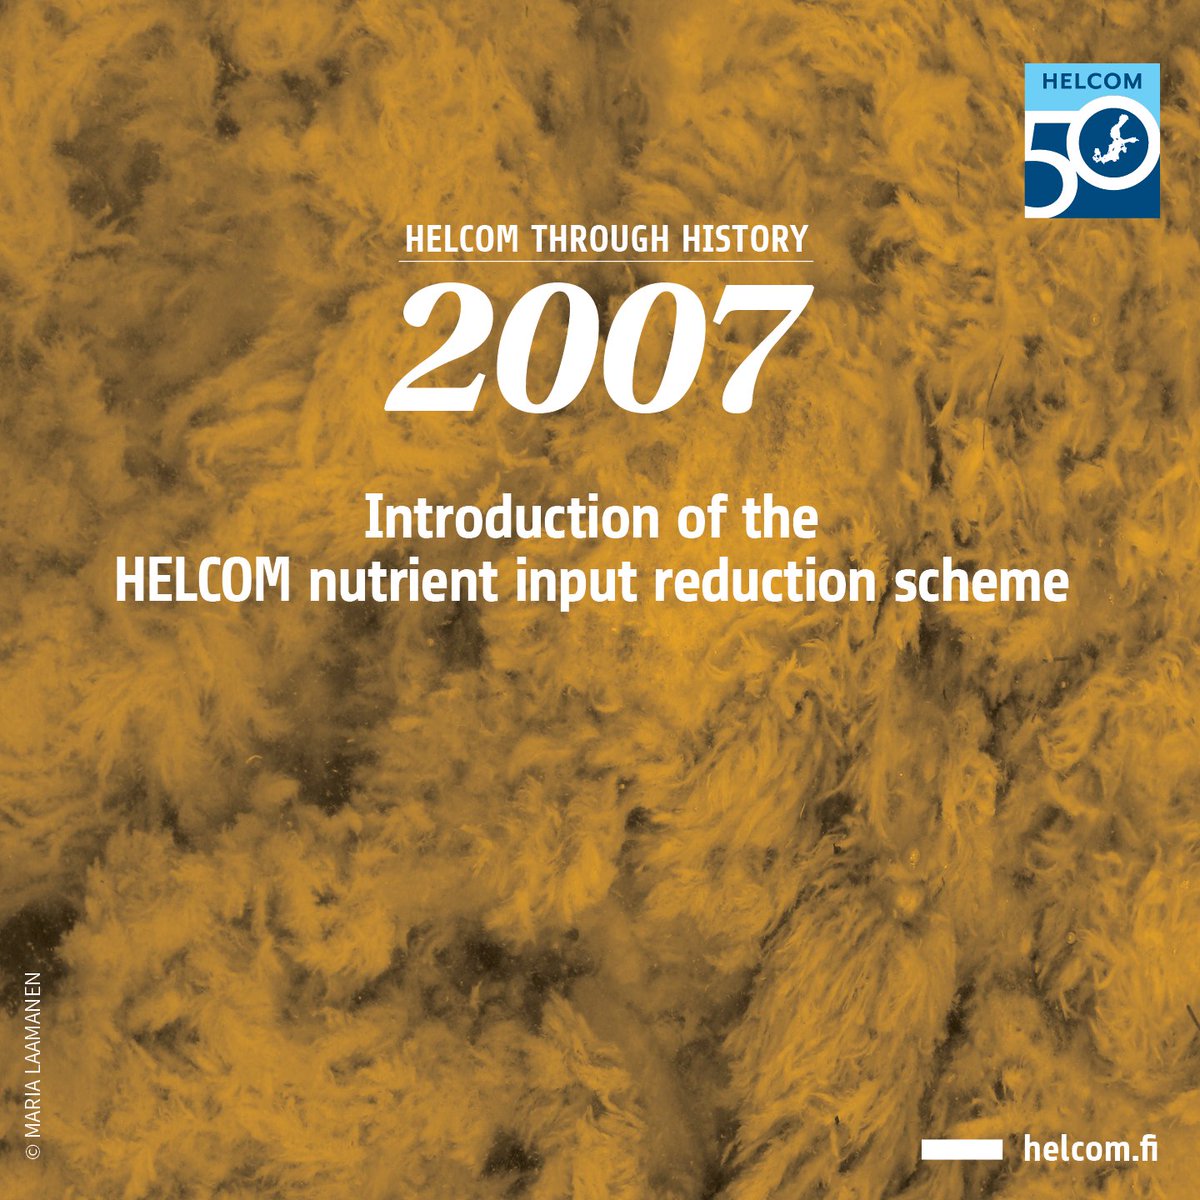 🕰️It’s HELCOM Through History time! 🕰️ Introduced within the Baltic Sea Action Plan, the HELCOM nutrient input reduction scheme is a regional approach to sharing the burden of nutrient reductions, with the aim of a Baltic Sea unaffected by eutrophication. #HELCOMThroughHistory